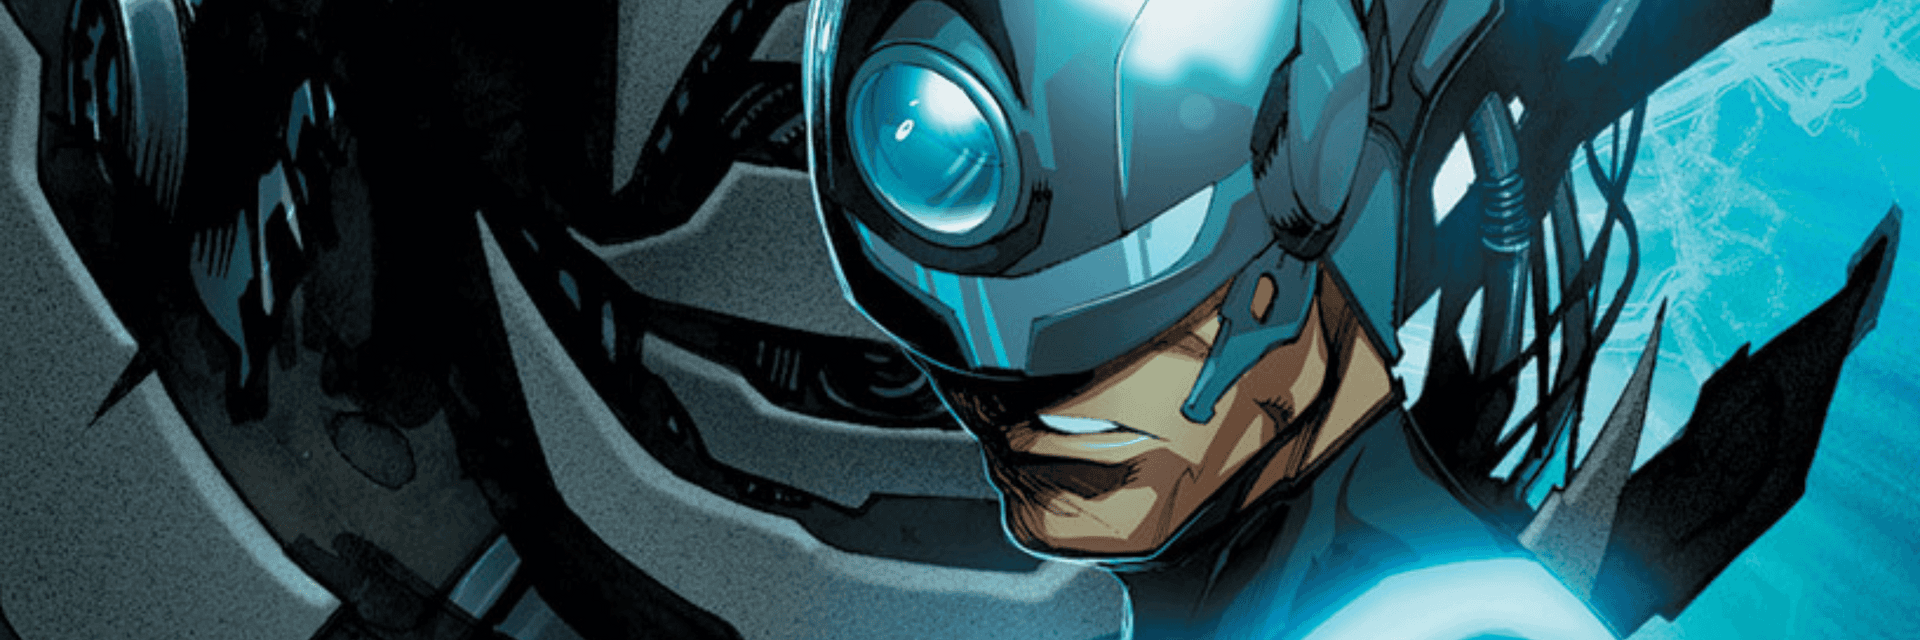 The Maker (Reed Richards)